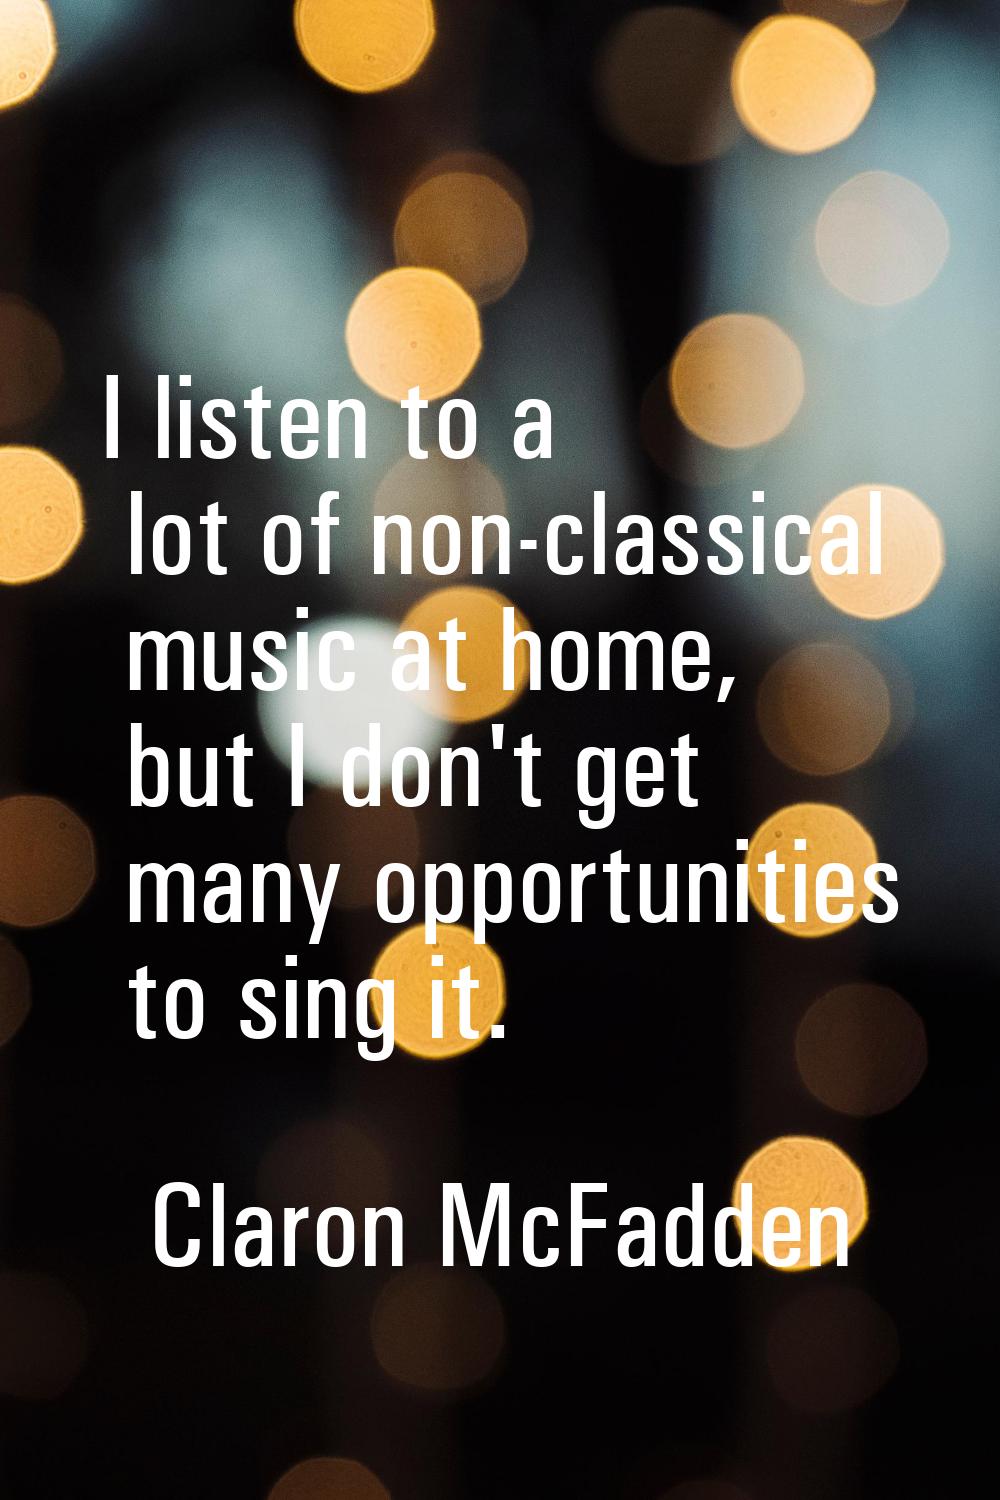 I listen to a lot of non-classical music at home, but I don't get many opportunities to sing it.